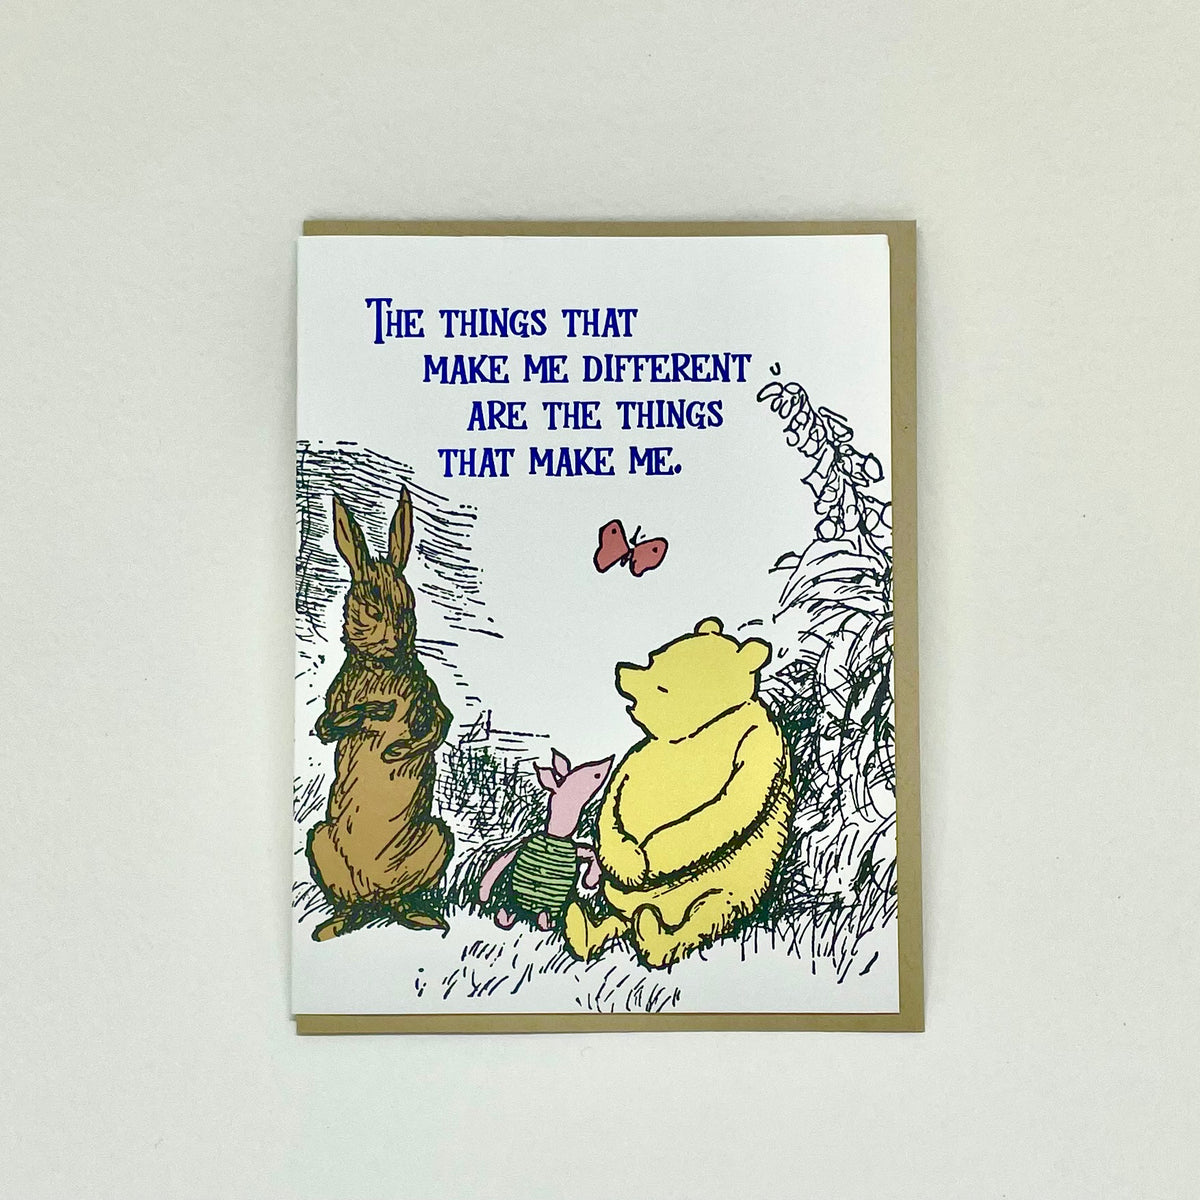 The Things that Make me Different... - Pooh Card